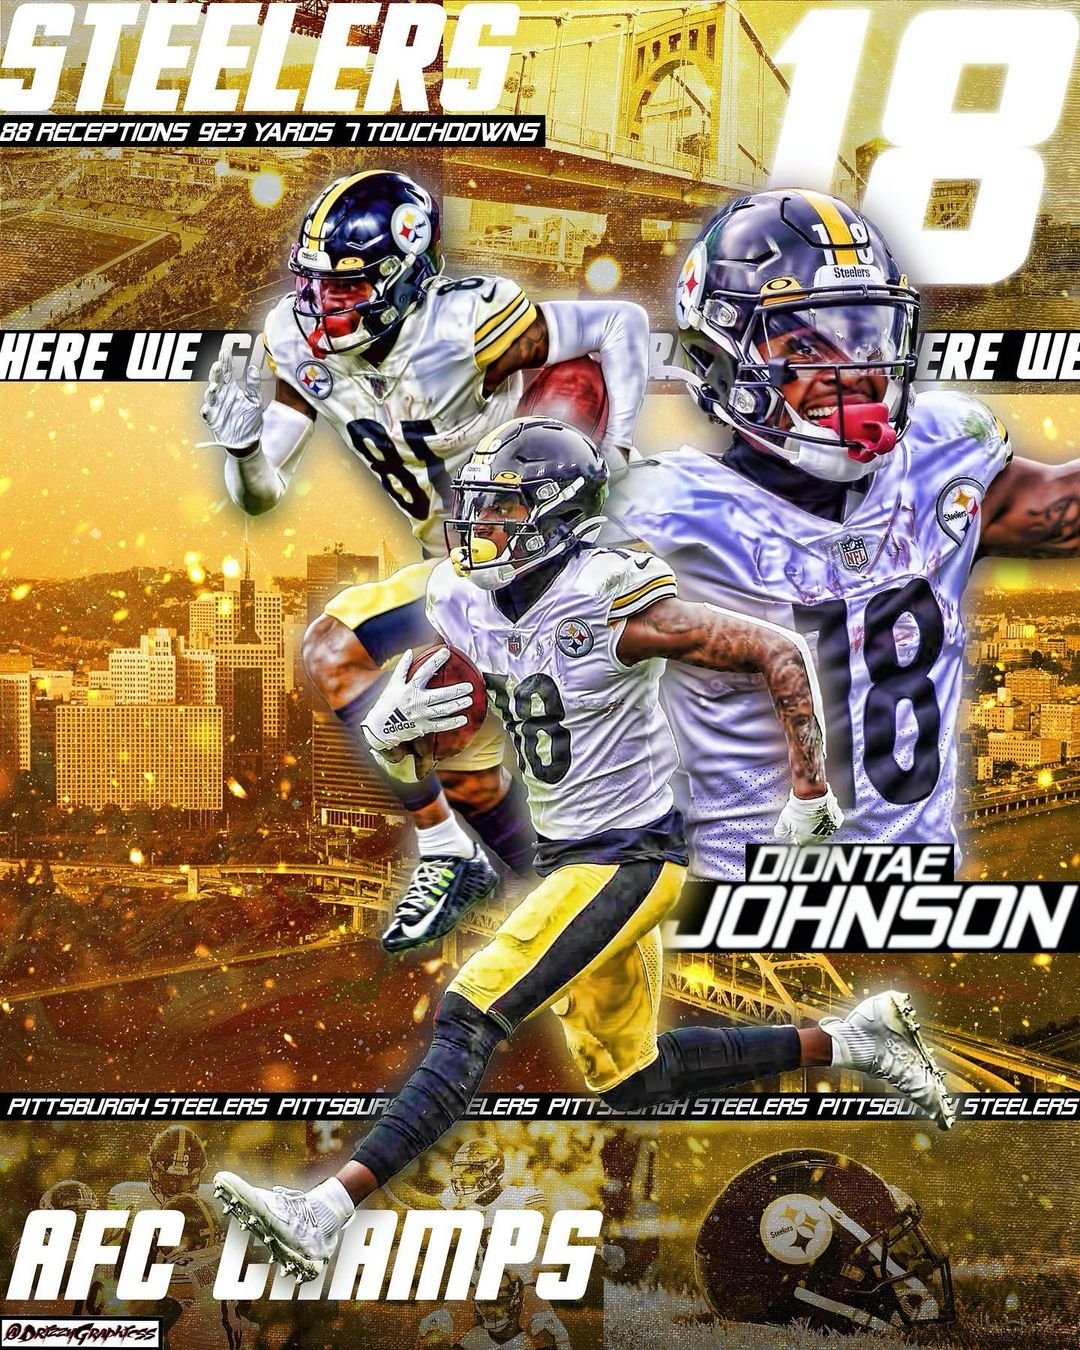 Diontae Johnson  20202021 Steelers Highlights ᴴᴰ  YouTube